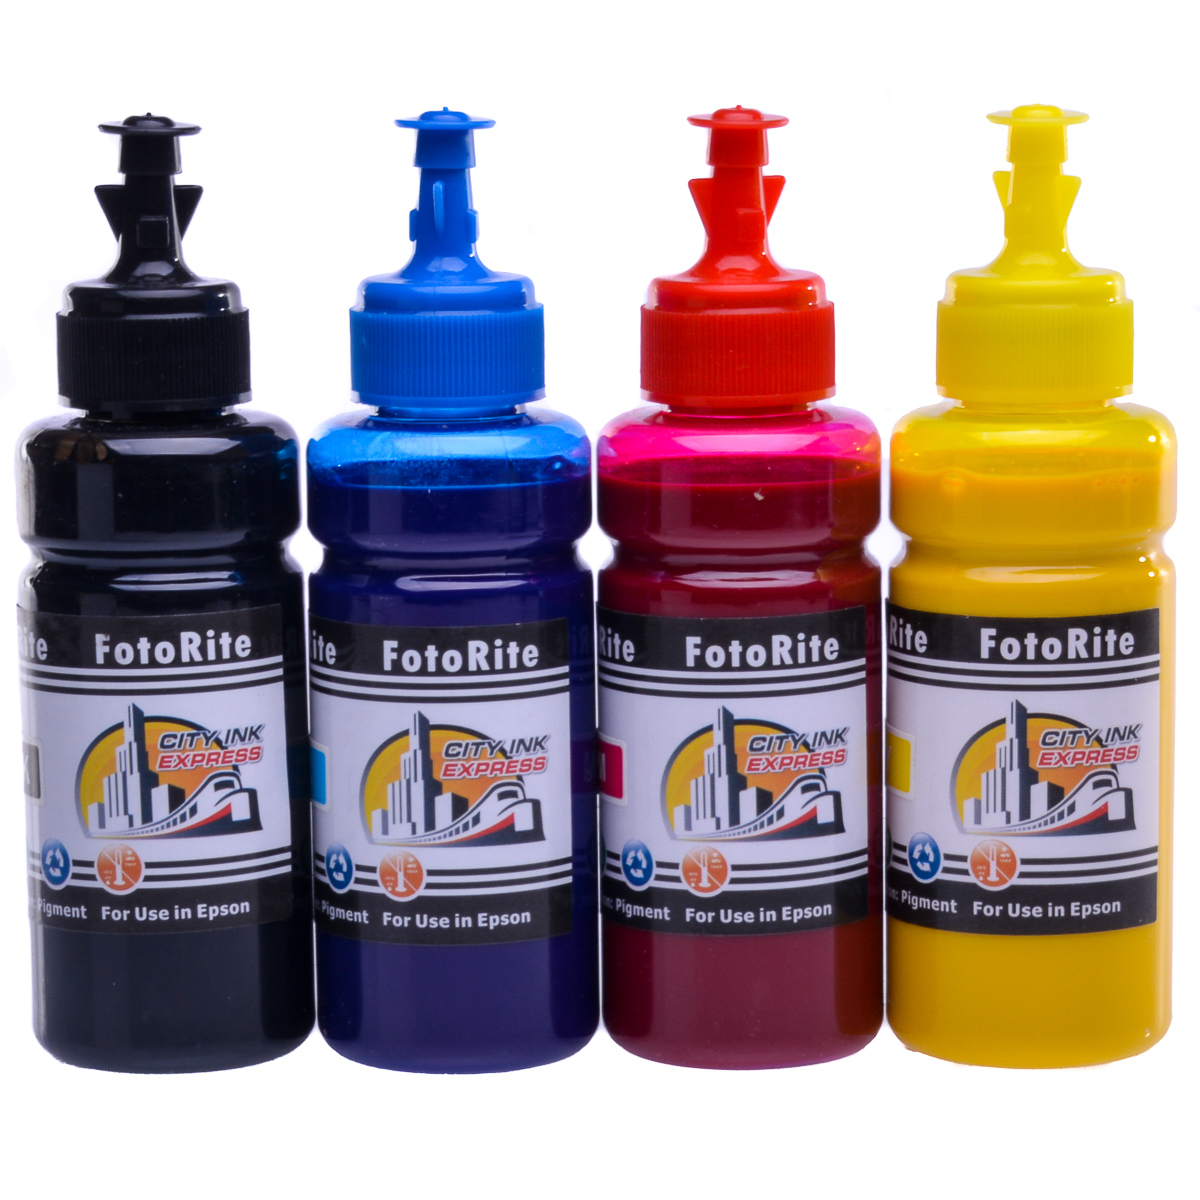 Cheap Multipack pigment ink refill replaces Epson WF-7830DTWF